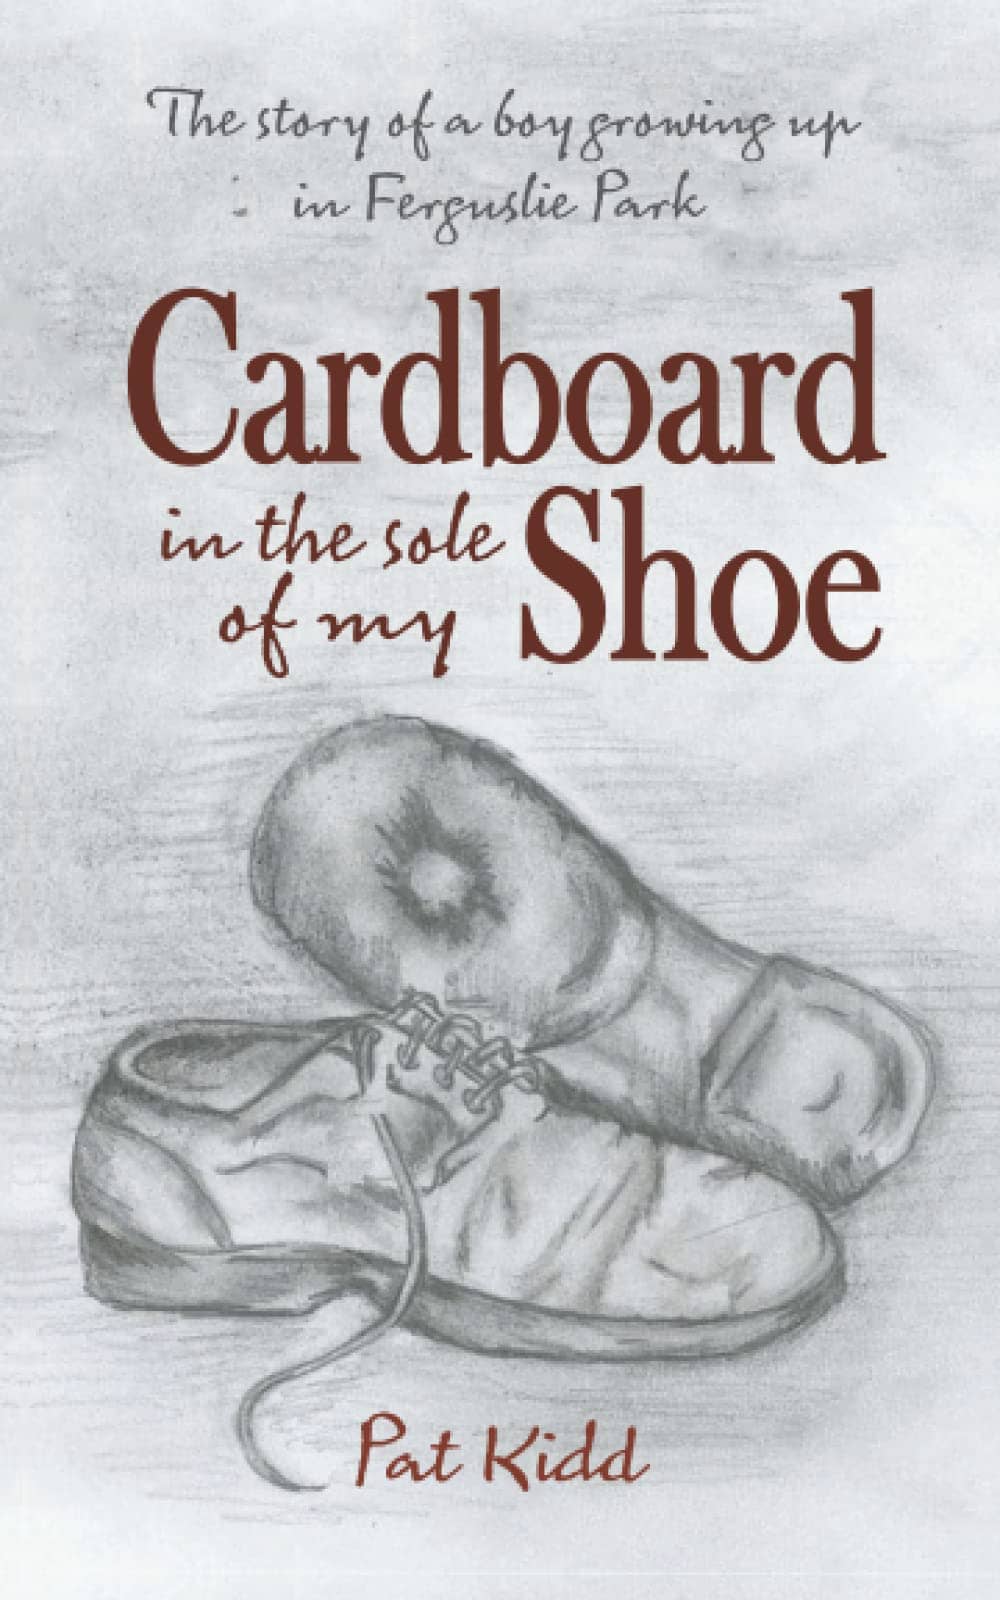 Just finished reading: “Cardboard In The Sole Of My Shoe” – Pat Kidd